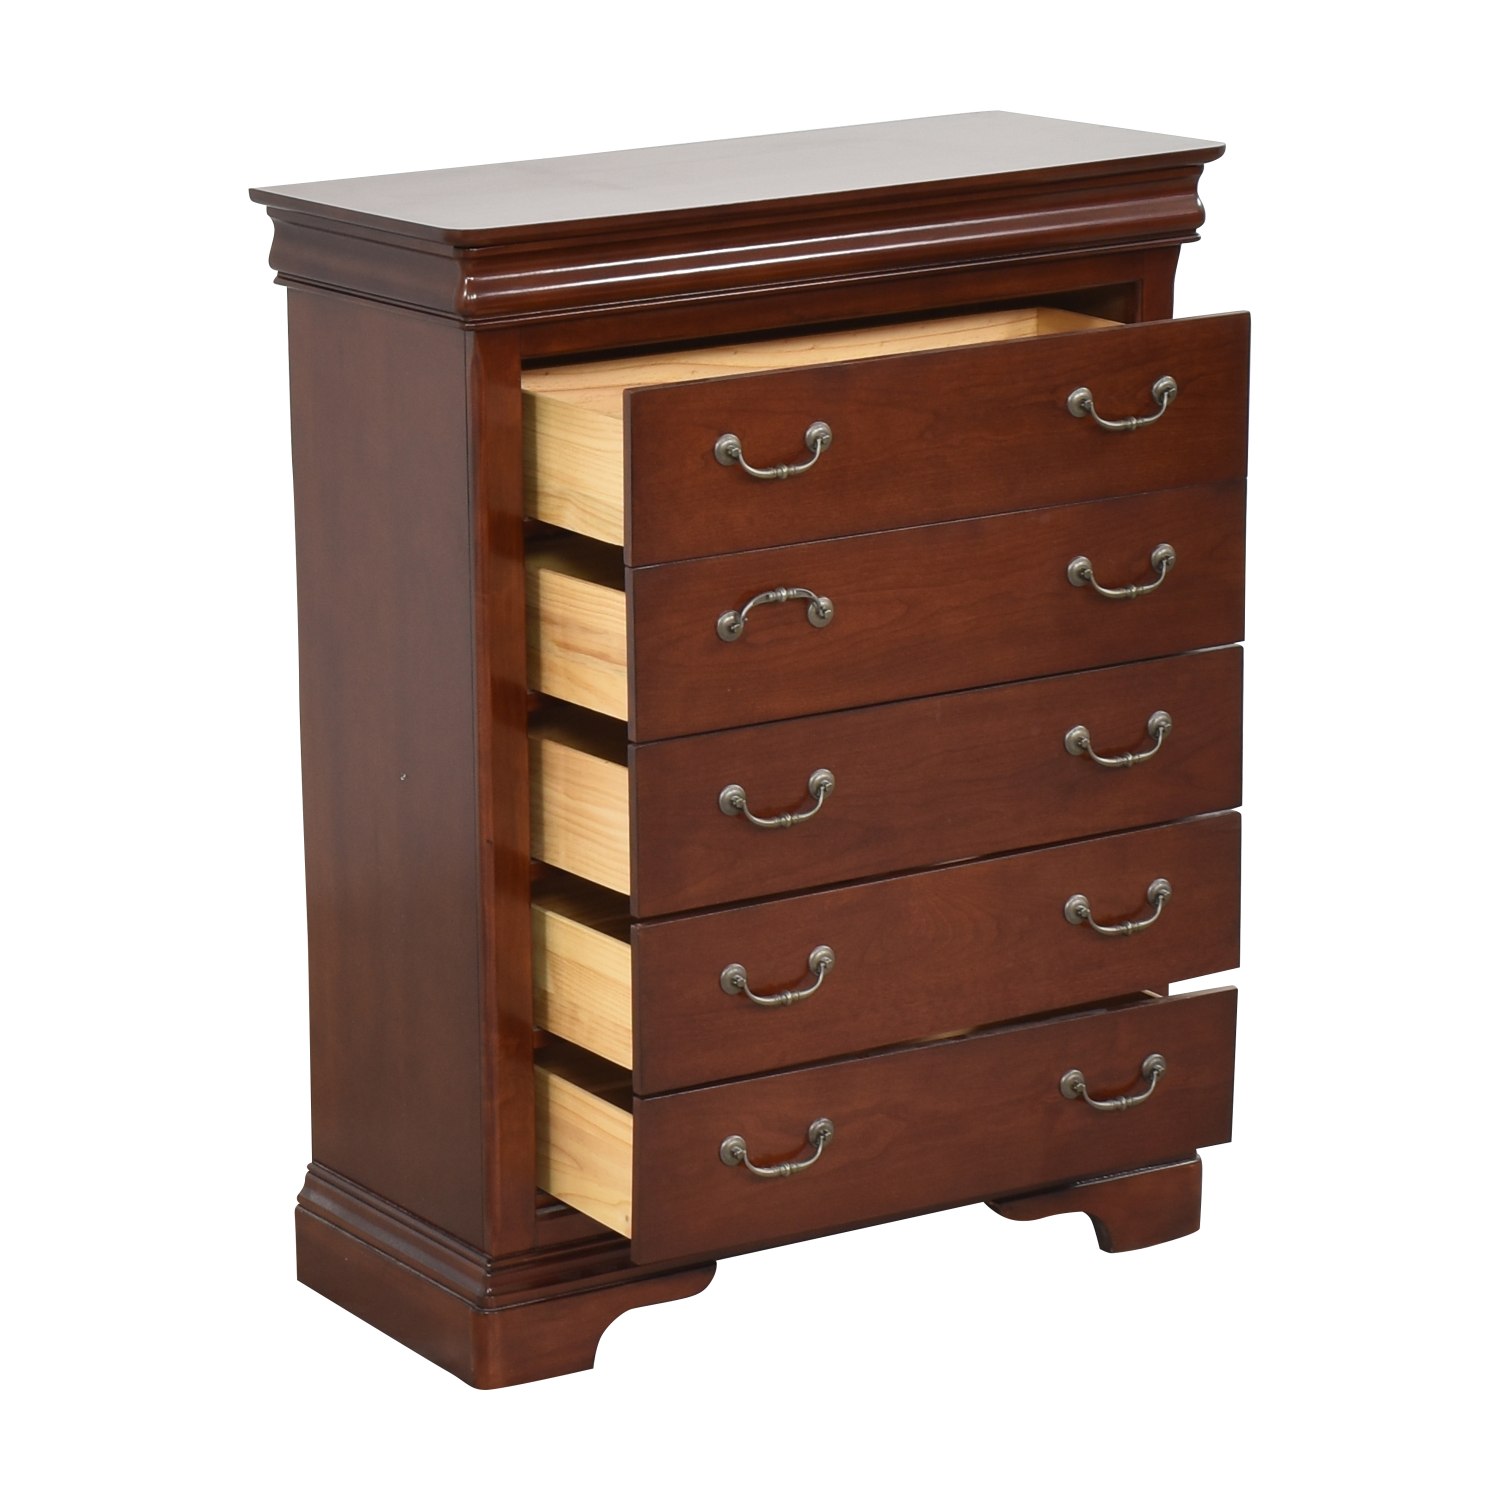 TRADITIONAL TALL 5 DRAWER CHEST